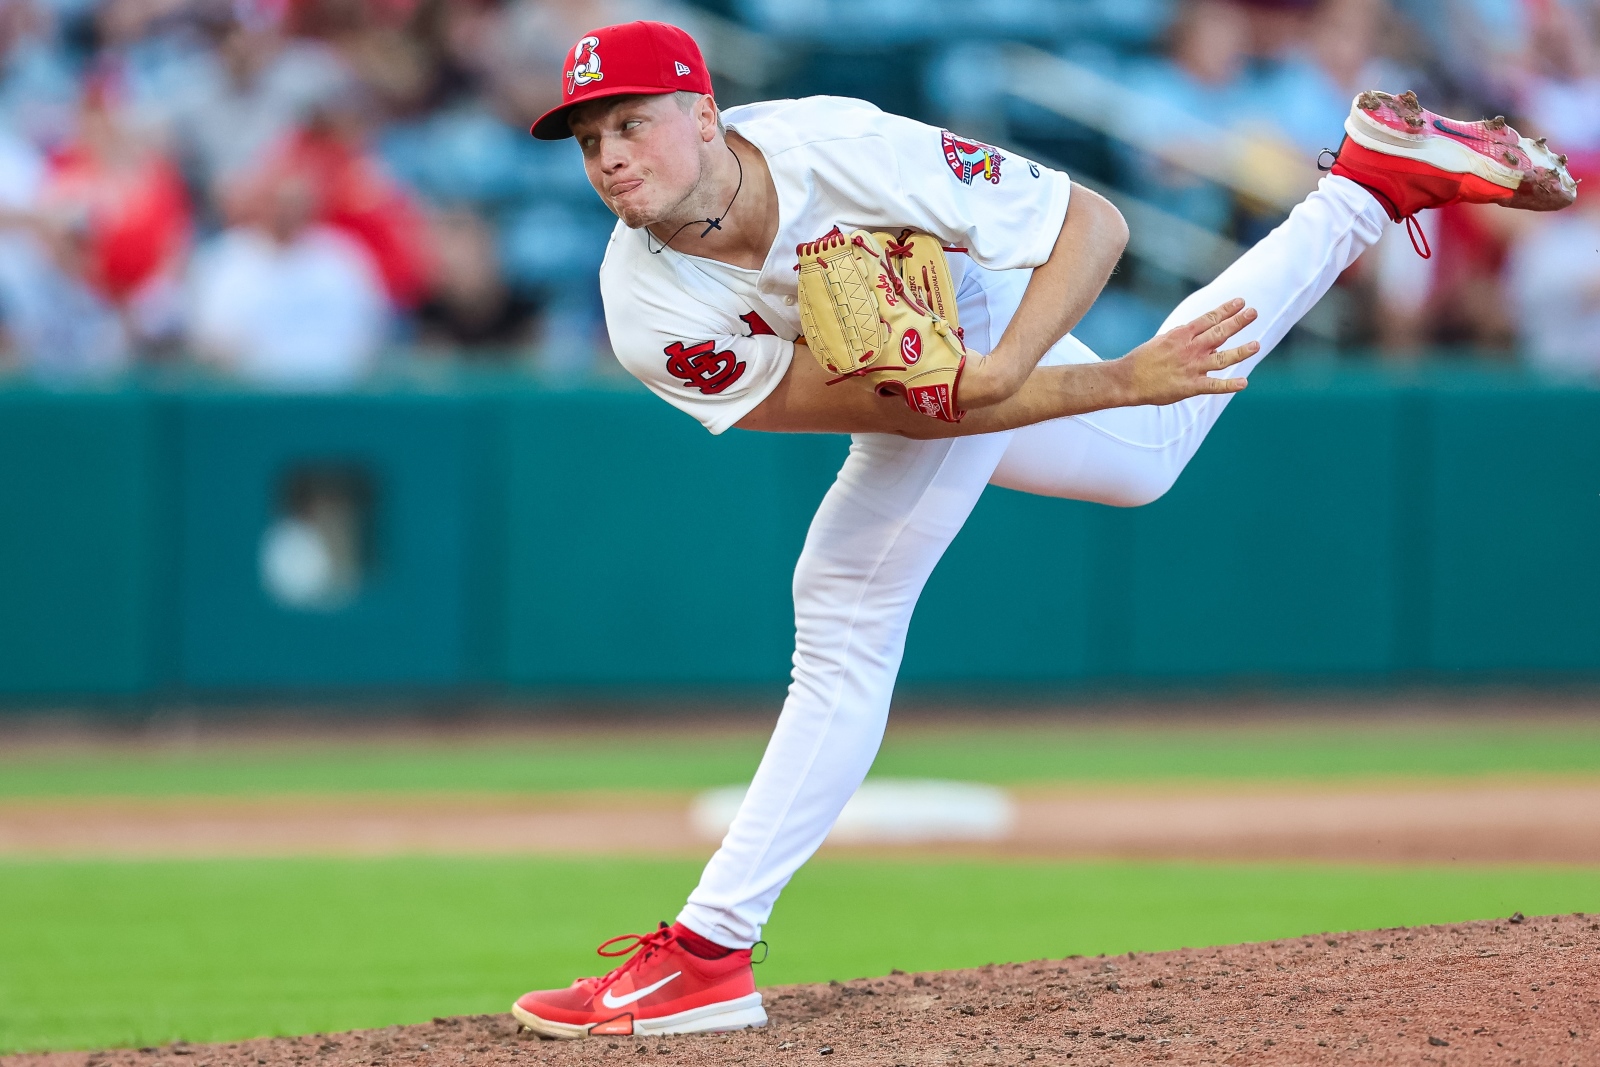 Tekoah Roby, wearing a Springfield Cardinals uniform, pitches during a game at Hammons Field.